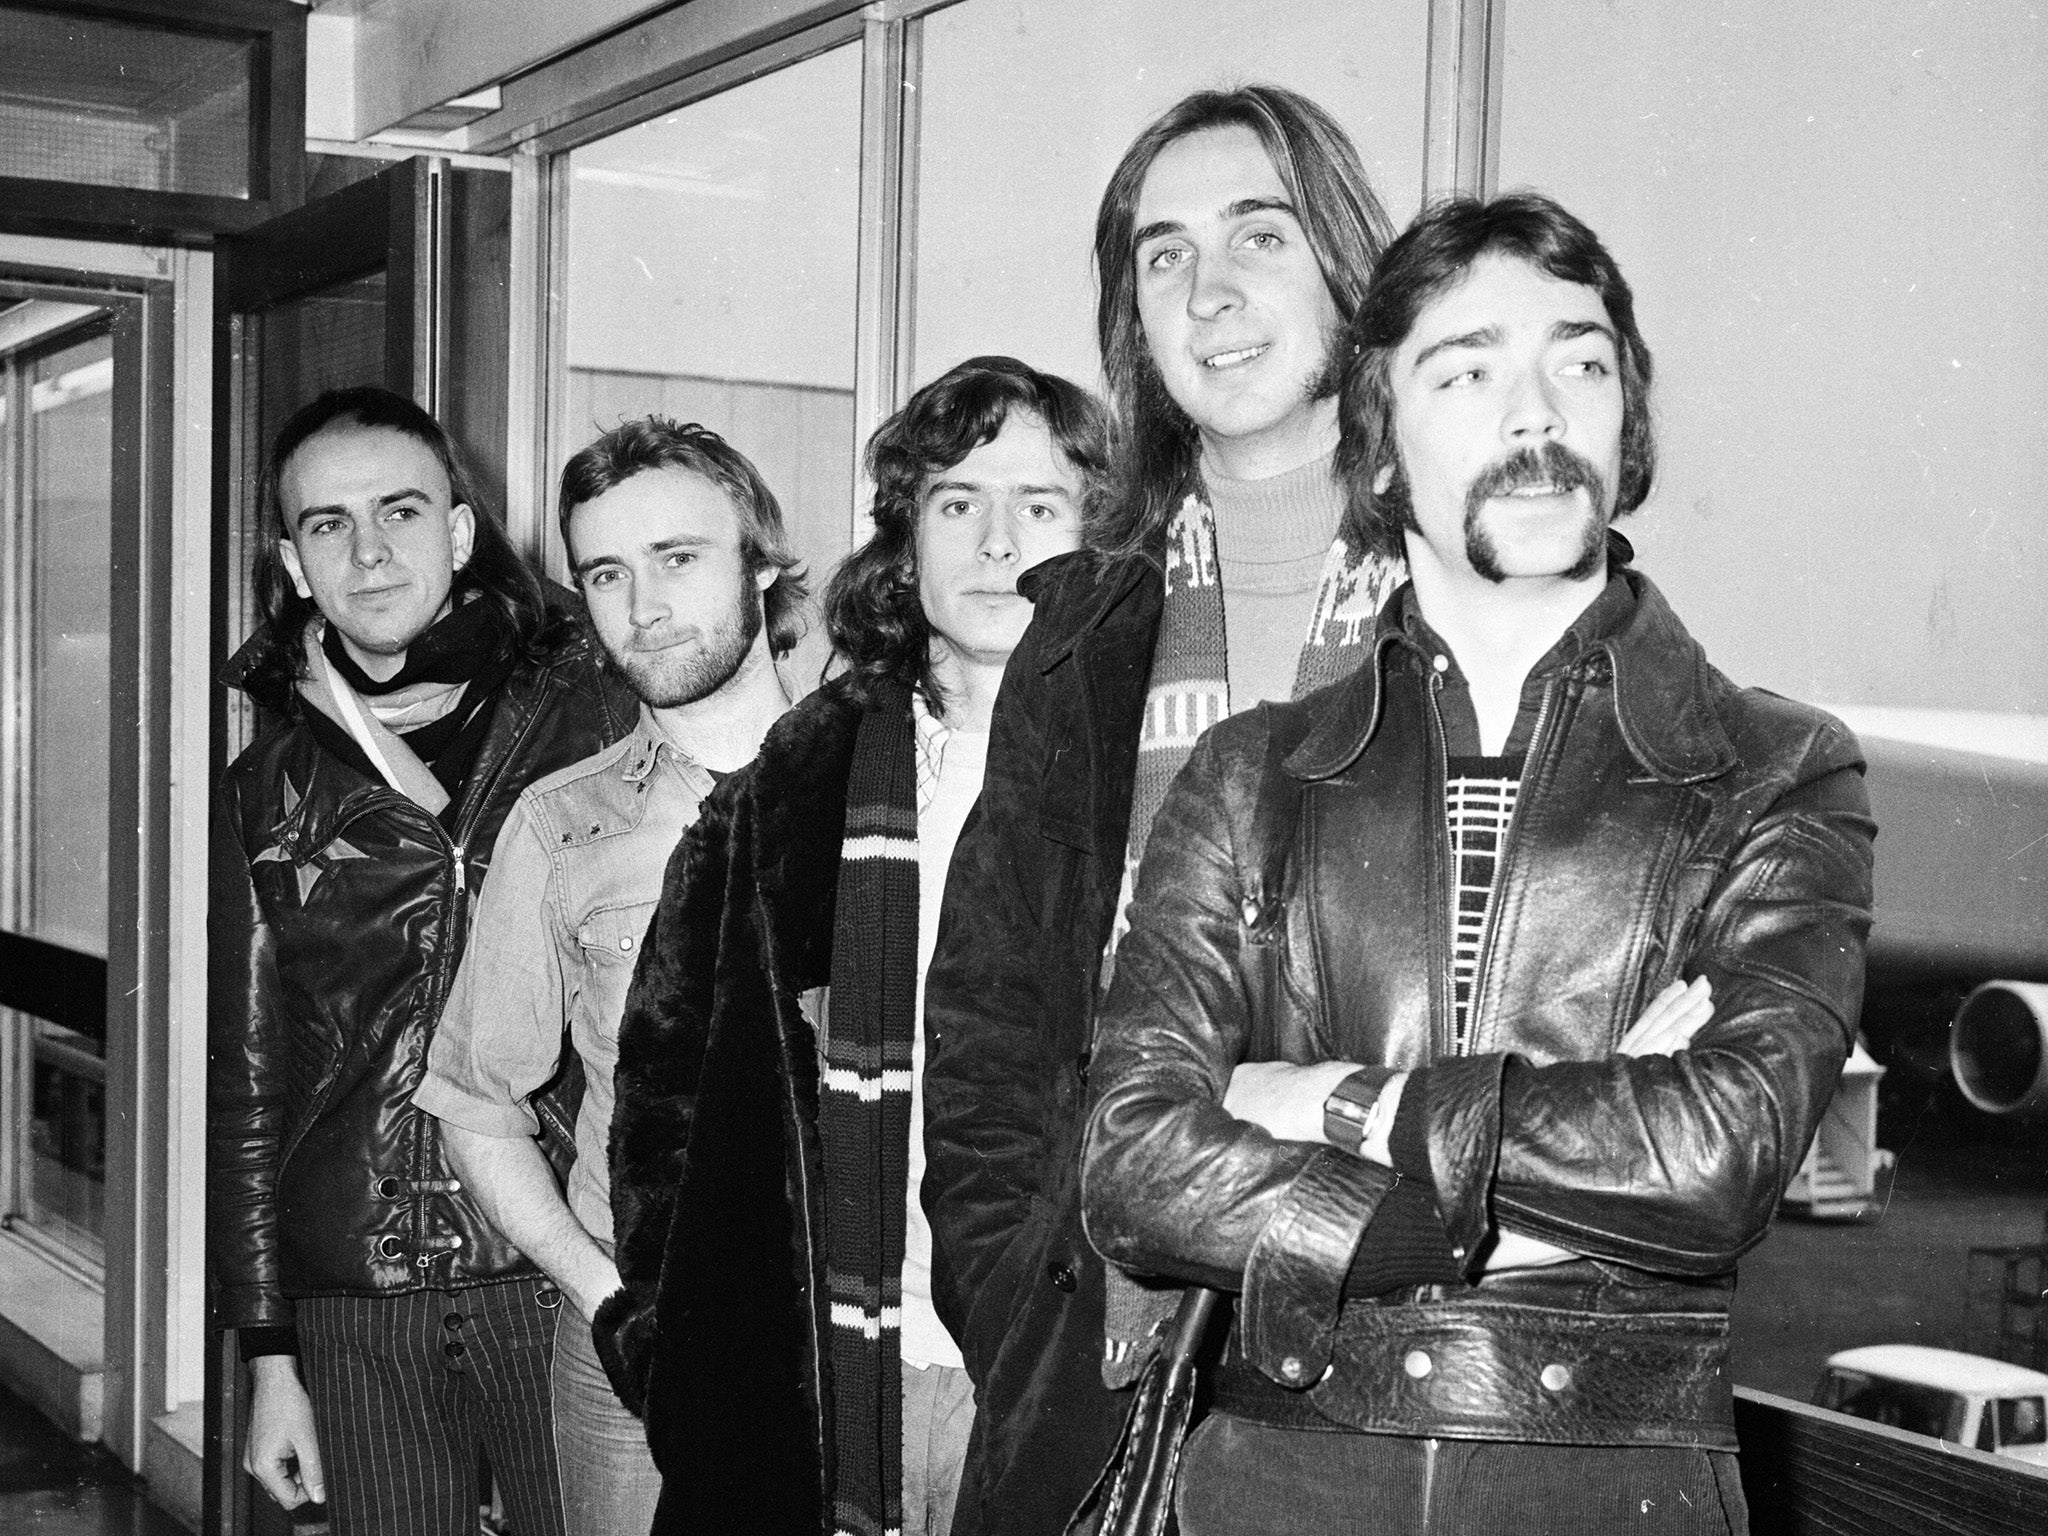 British rock group Genesis: Peter Gabriel, Phil Collins, Tony Banks, Mike Rutherford and Steve Hackett